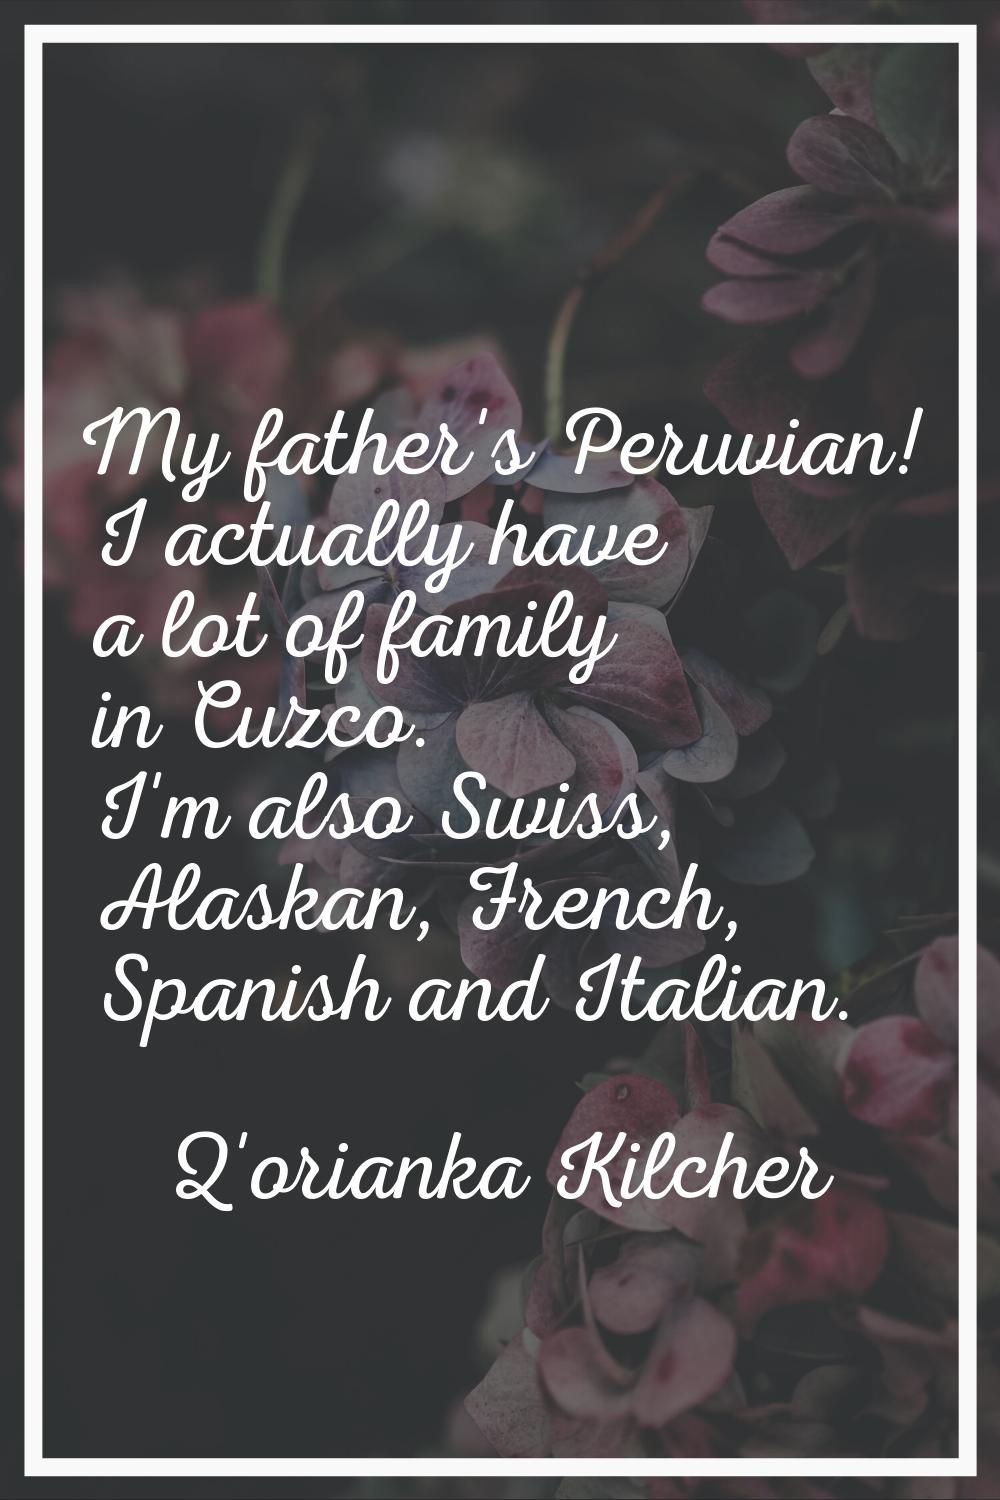 My father's Peruvian! I actually have a lot of family in Cuzco. I'm also Swiss, Alaskan, French, Sp